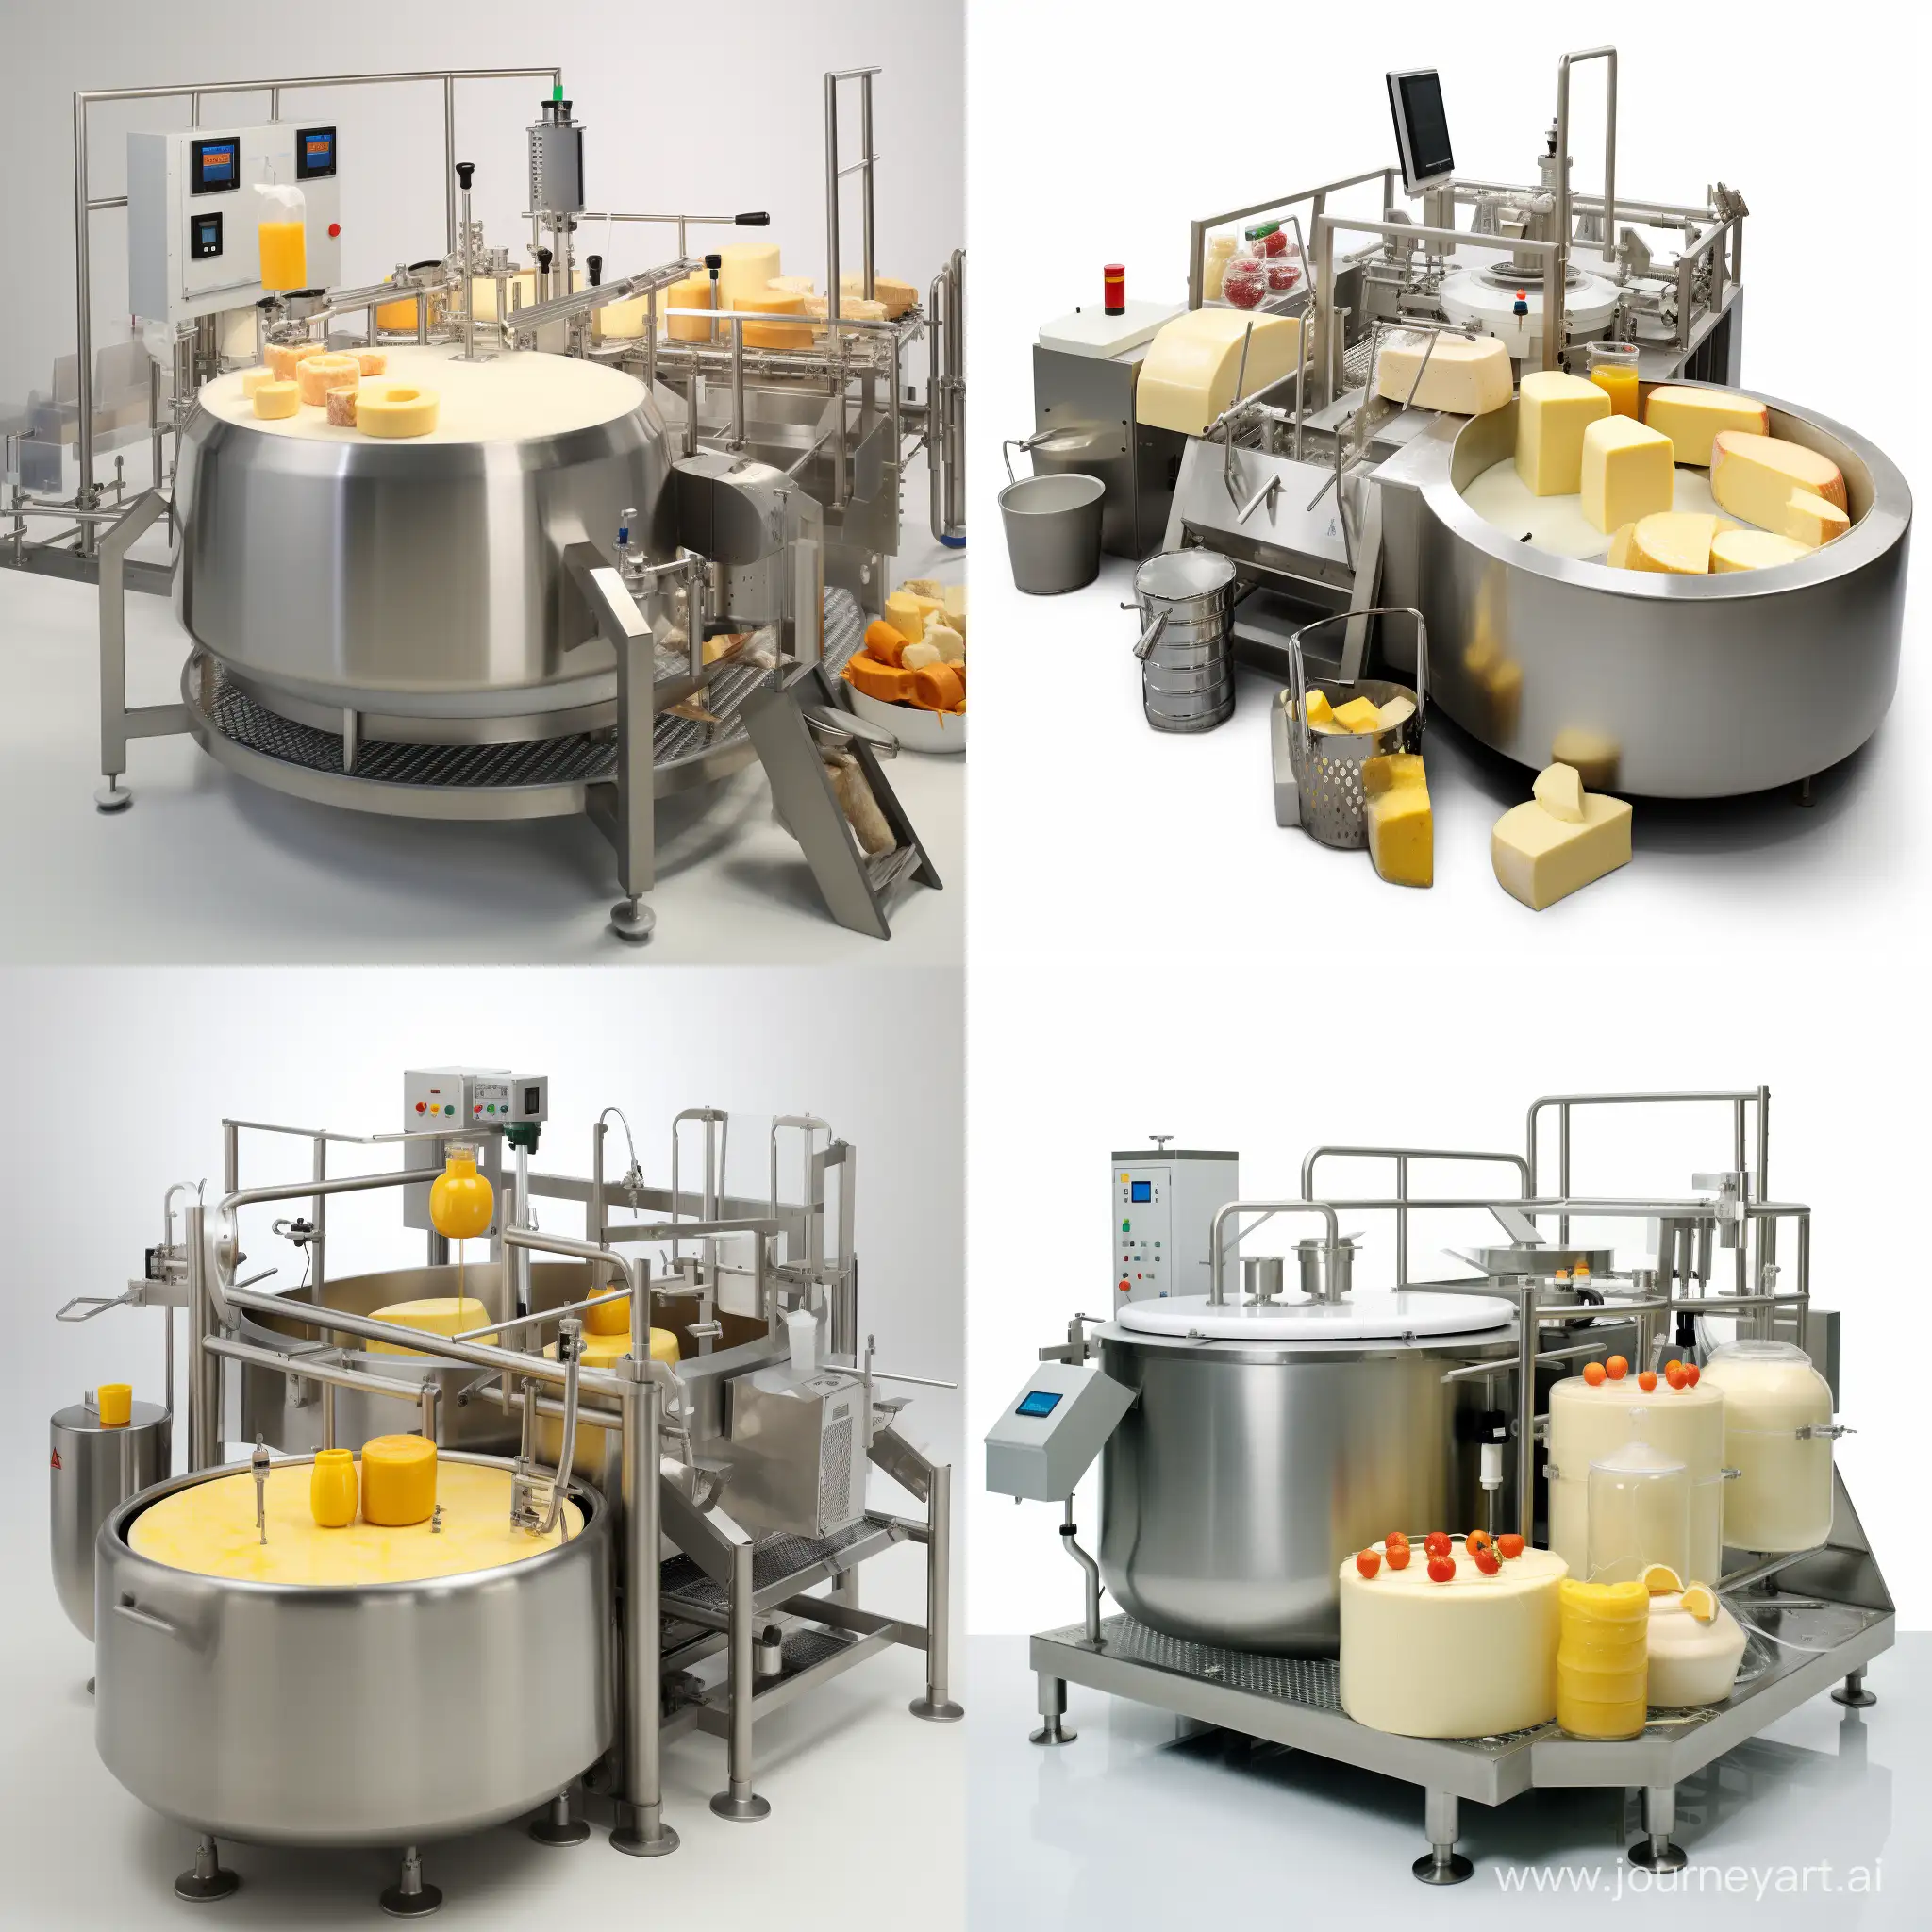 Cylindrical-CheeseMaking-Tub-with-Rotating-Stirrer-Innovative-OpenDesign-Manufacturing